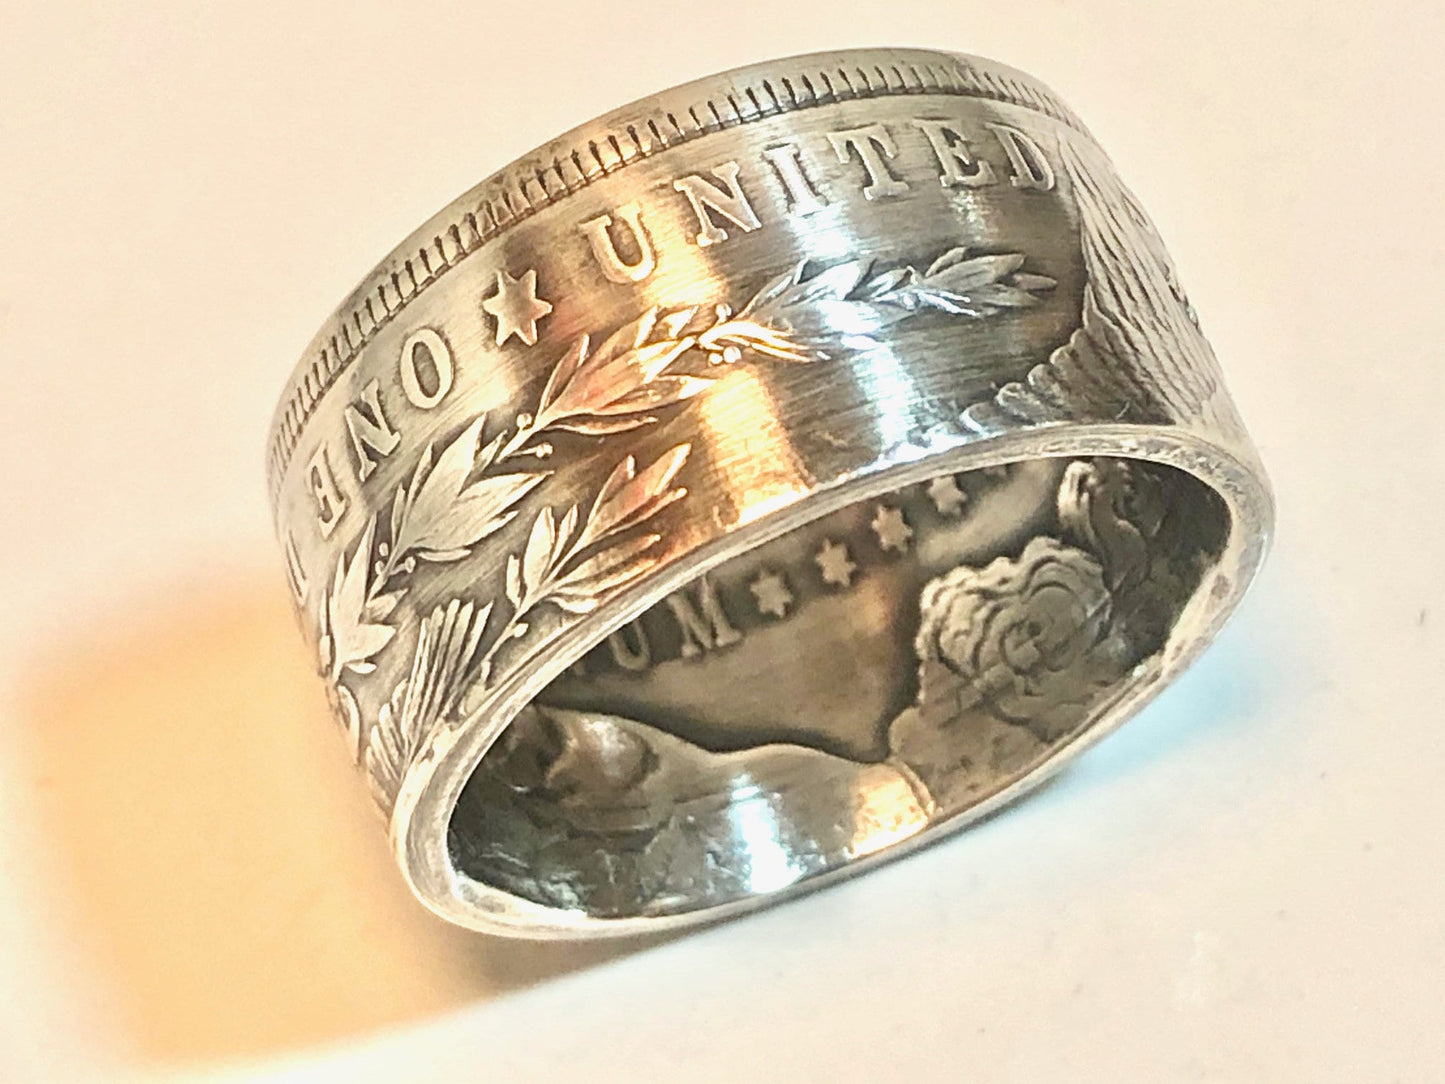 Morgan Dollar 1921 Ring Silver United States Coin Ring Personal Jewelry Ring Gift For Friend Coin Ring Gift For Him Her World Coin Collector